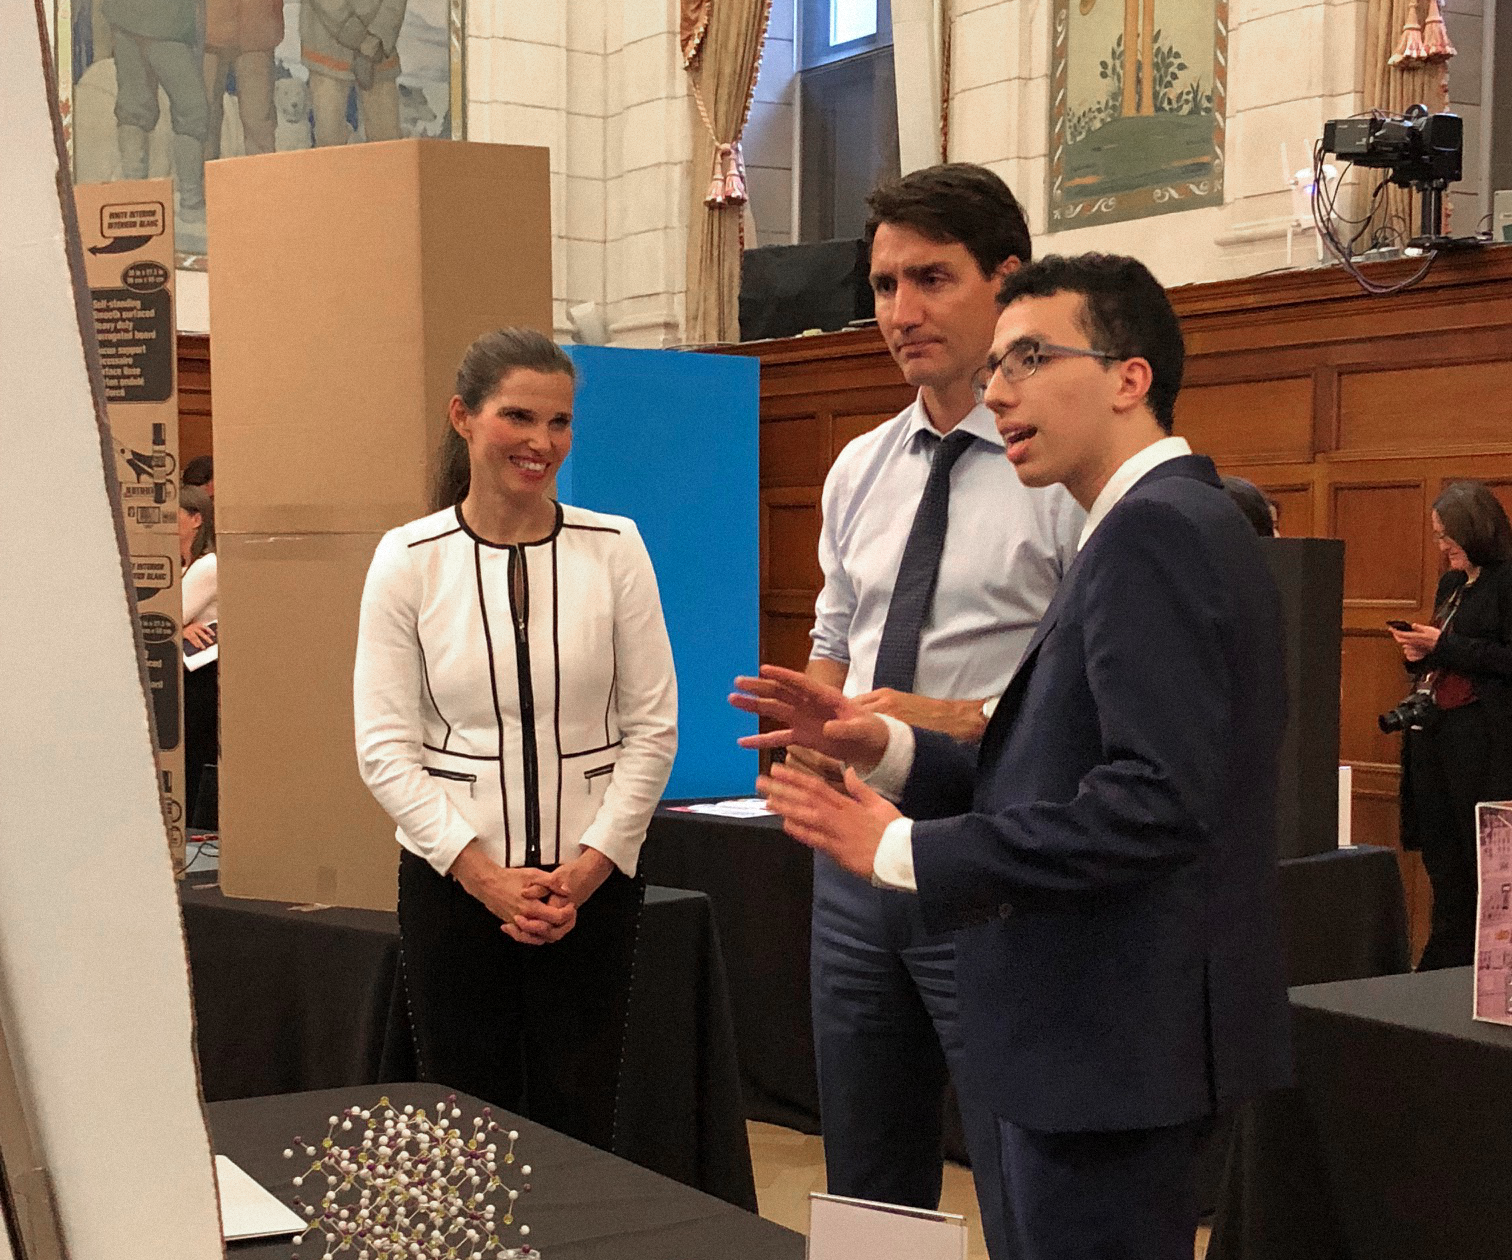 Kenz Zaghib, a first-year Faculty of Engineering student explaining science fair project to Prime Minister Justin Trudeau and another woman